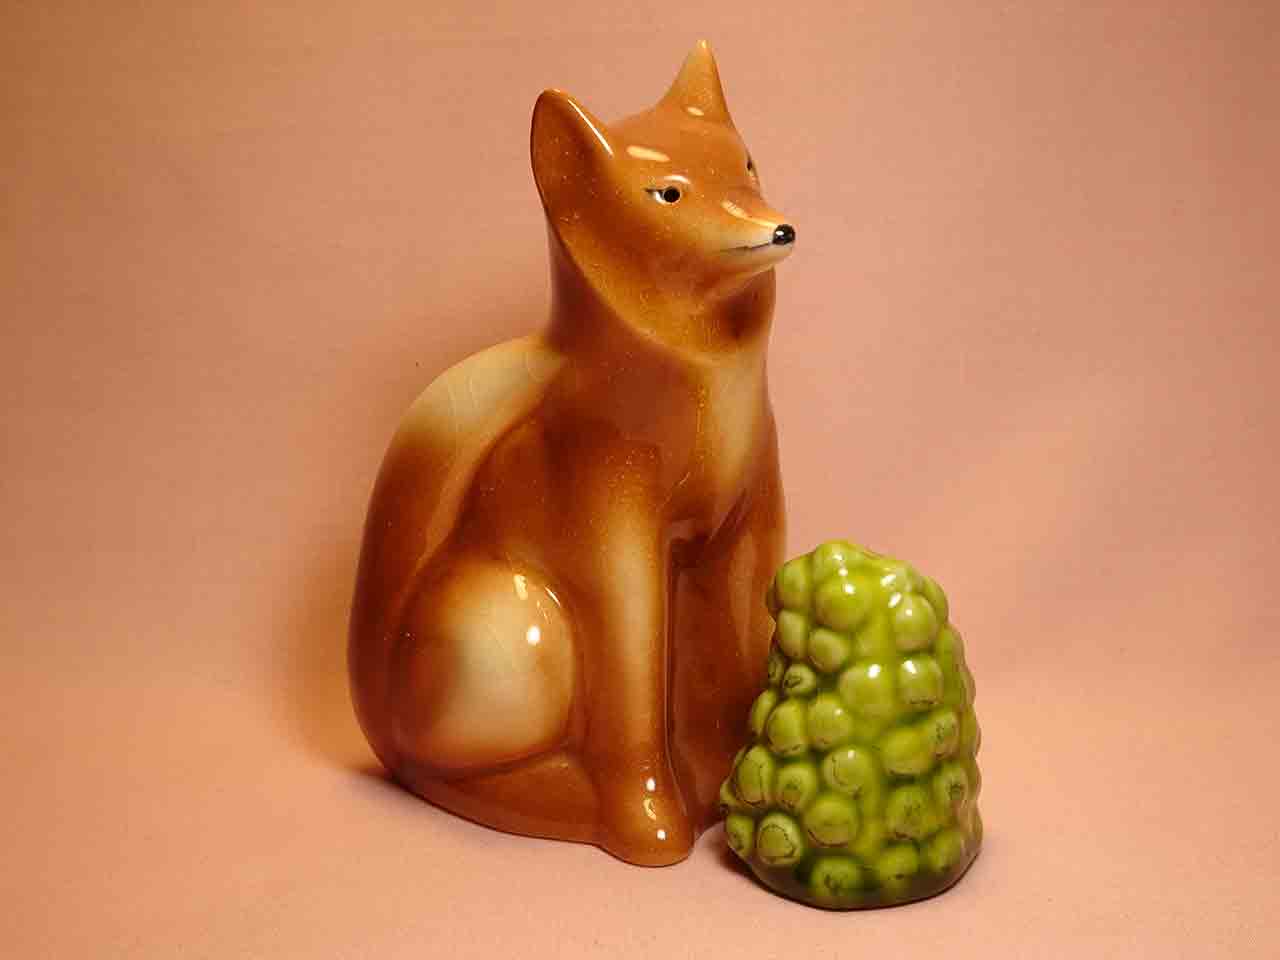 Aesop's Fable - The Fox and the Grapes - salt and pepper shakers